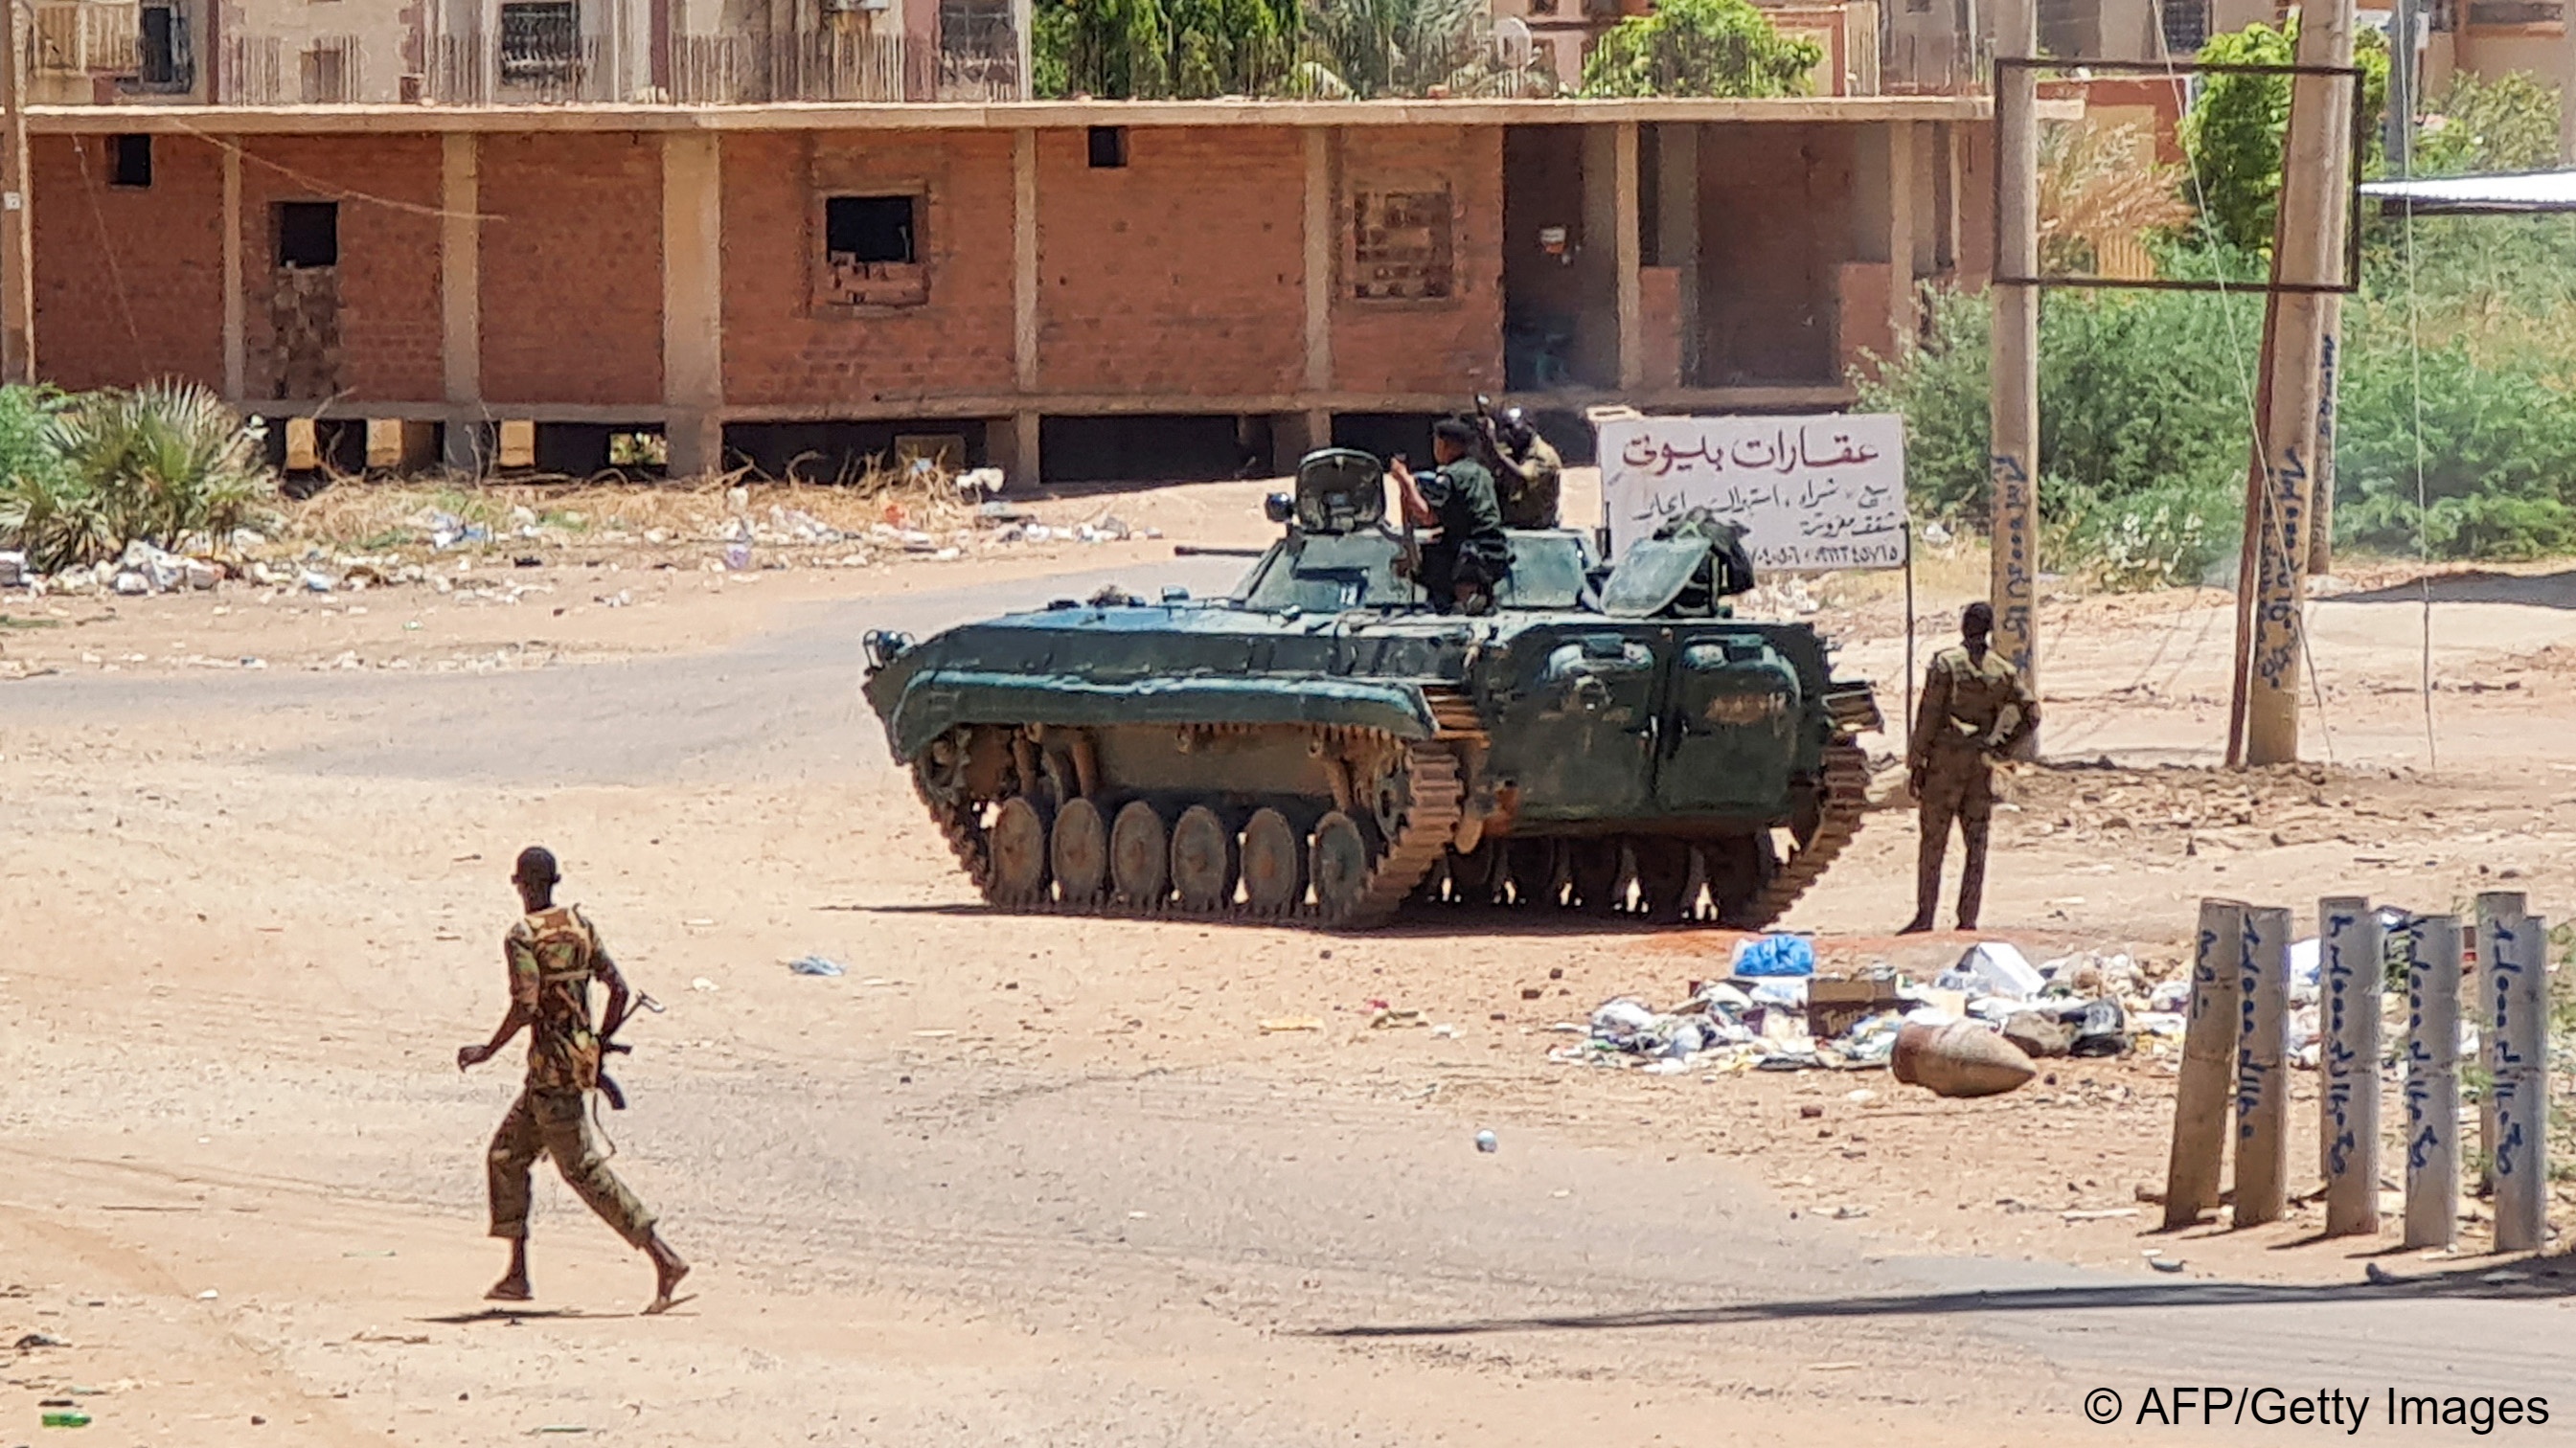 Sudanese Army soldiers walk near armoured vehicles stationed on a street in southern Khartoum, Sudan, 6 May  2023 (photo: AFP/Getty Images)